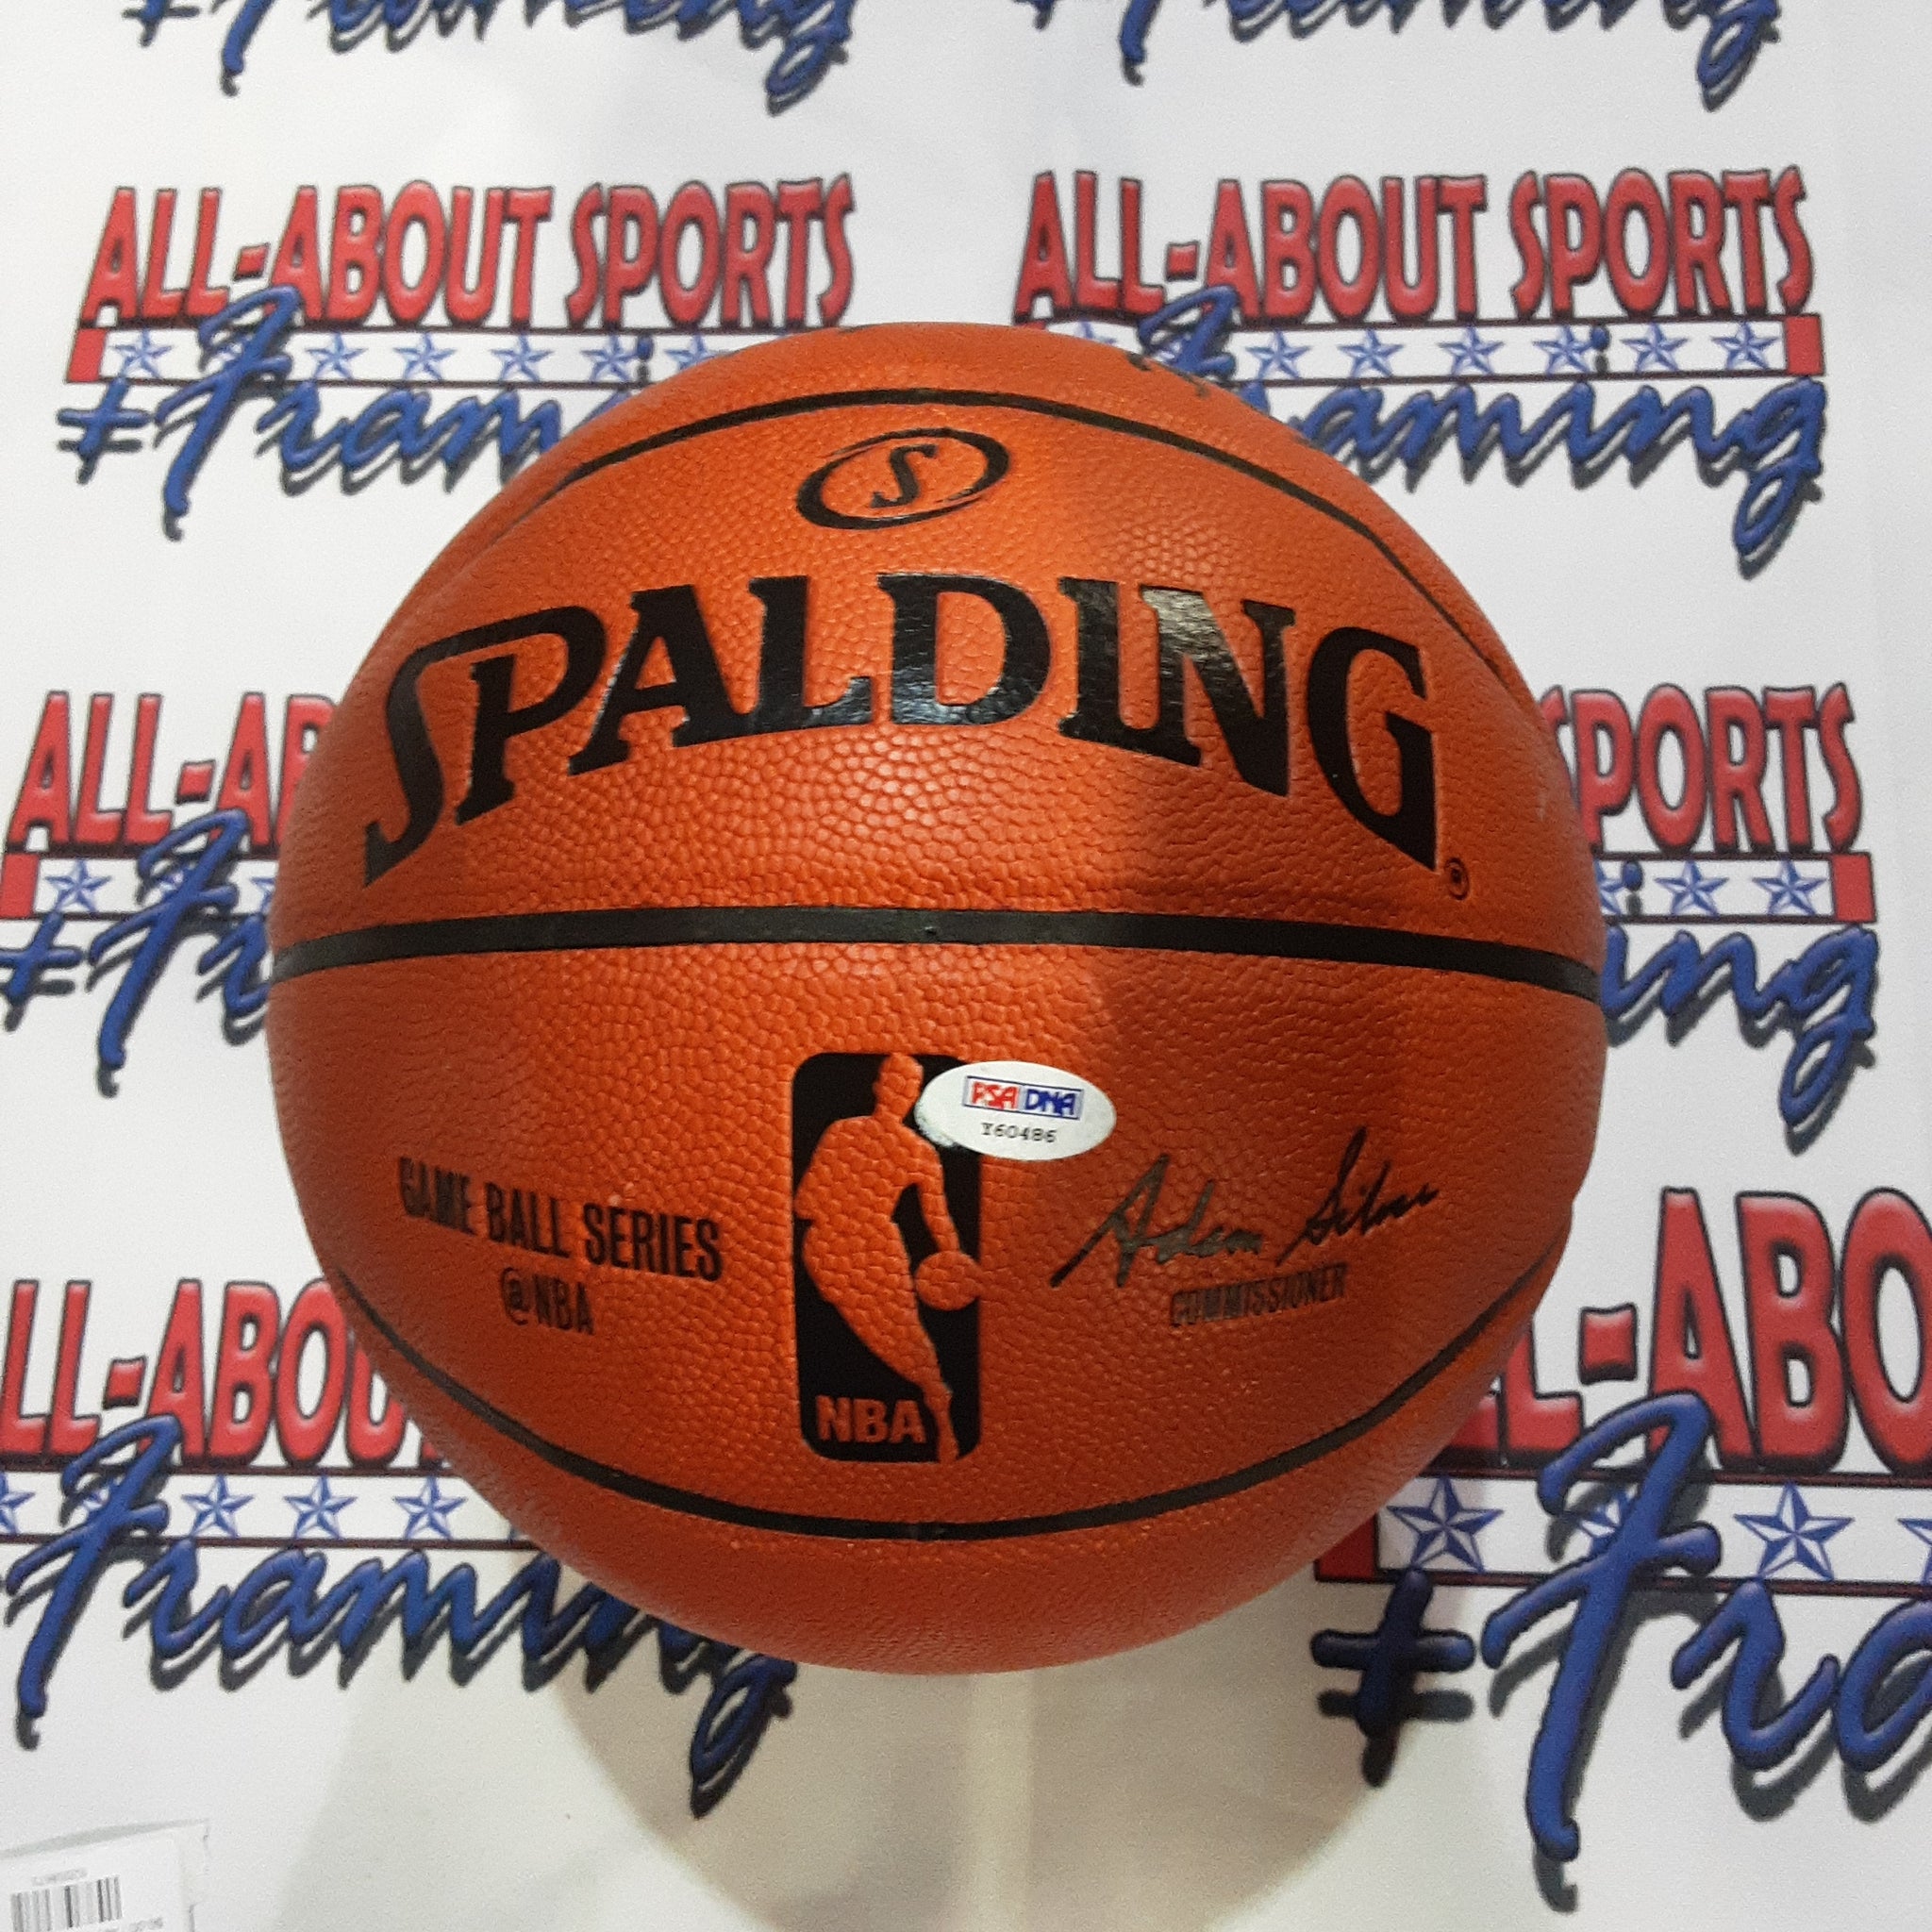 Andrew Wiggins Authentic Signed Basketball Autographed with Inscription JSA